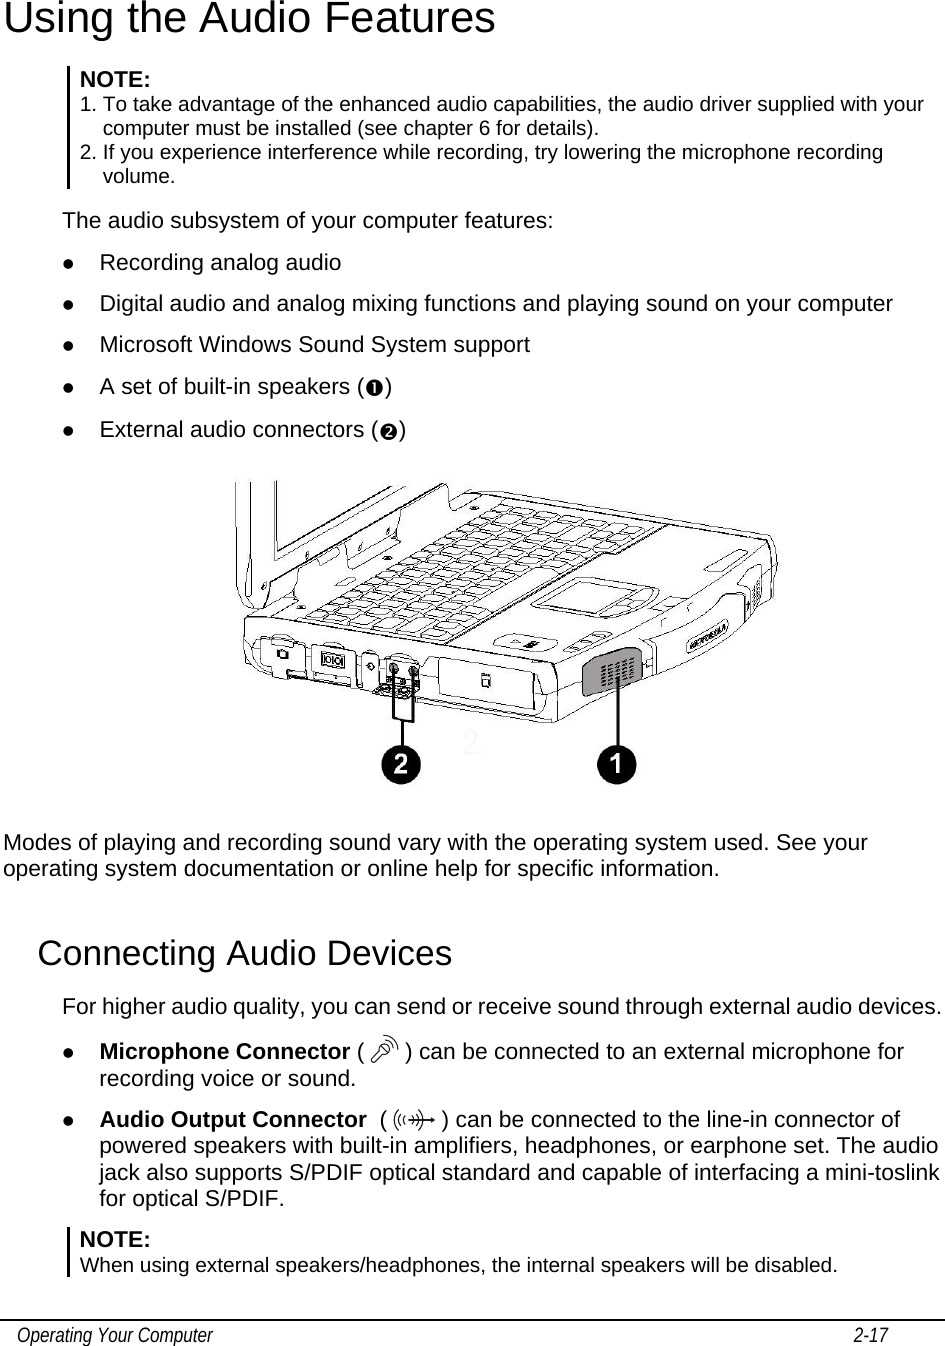    Operating Your Computer                                                                                                                                       2-17   Using the Audio Features NOTE: 1. To take advantage of the enhanced audio capabilities, the audio driver supplied with your computer must be installed (see chapter 6 for details). 2. If you experience interference while recording, try lowering the microphone recording volume.  The audio subsystem of your computer features: z Recording analog audio z Digital audio and analog mixing functions and playing sound on your computer z Microsoft Windows Sound System support z A set of built-in speakers (n) z External audio connectors (o)  Modes of playing and recording sound vary with the operating system used. See your operating system documentation or online help for specific information. Connecting Audio Devices For higher audio quality, you can send or receive sound through external audio devices. z Microphone Connector (  ) can be connected to an external microphone for recording voice or sound. z Audio Output Connector  (   ) can be connected to the line-in connector of powered speakers with built-in amplifiers, headphones, or earphone set. The audio jack also supports S/PDIF optical standard and capable of interfacing a mini-toslink for optical S/PDIF. NOTE:  When using external speakers/headphones, the internal speakers will be disabled. 